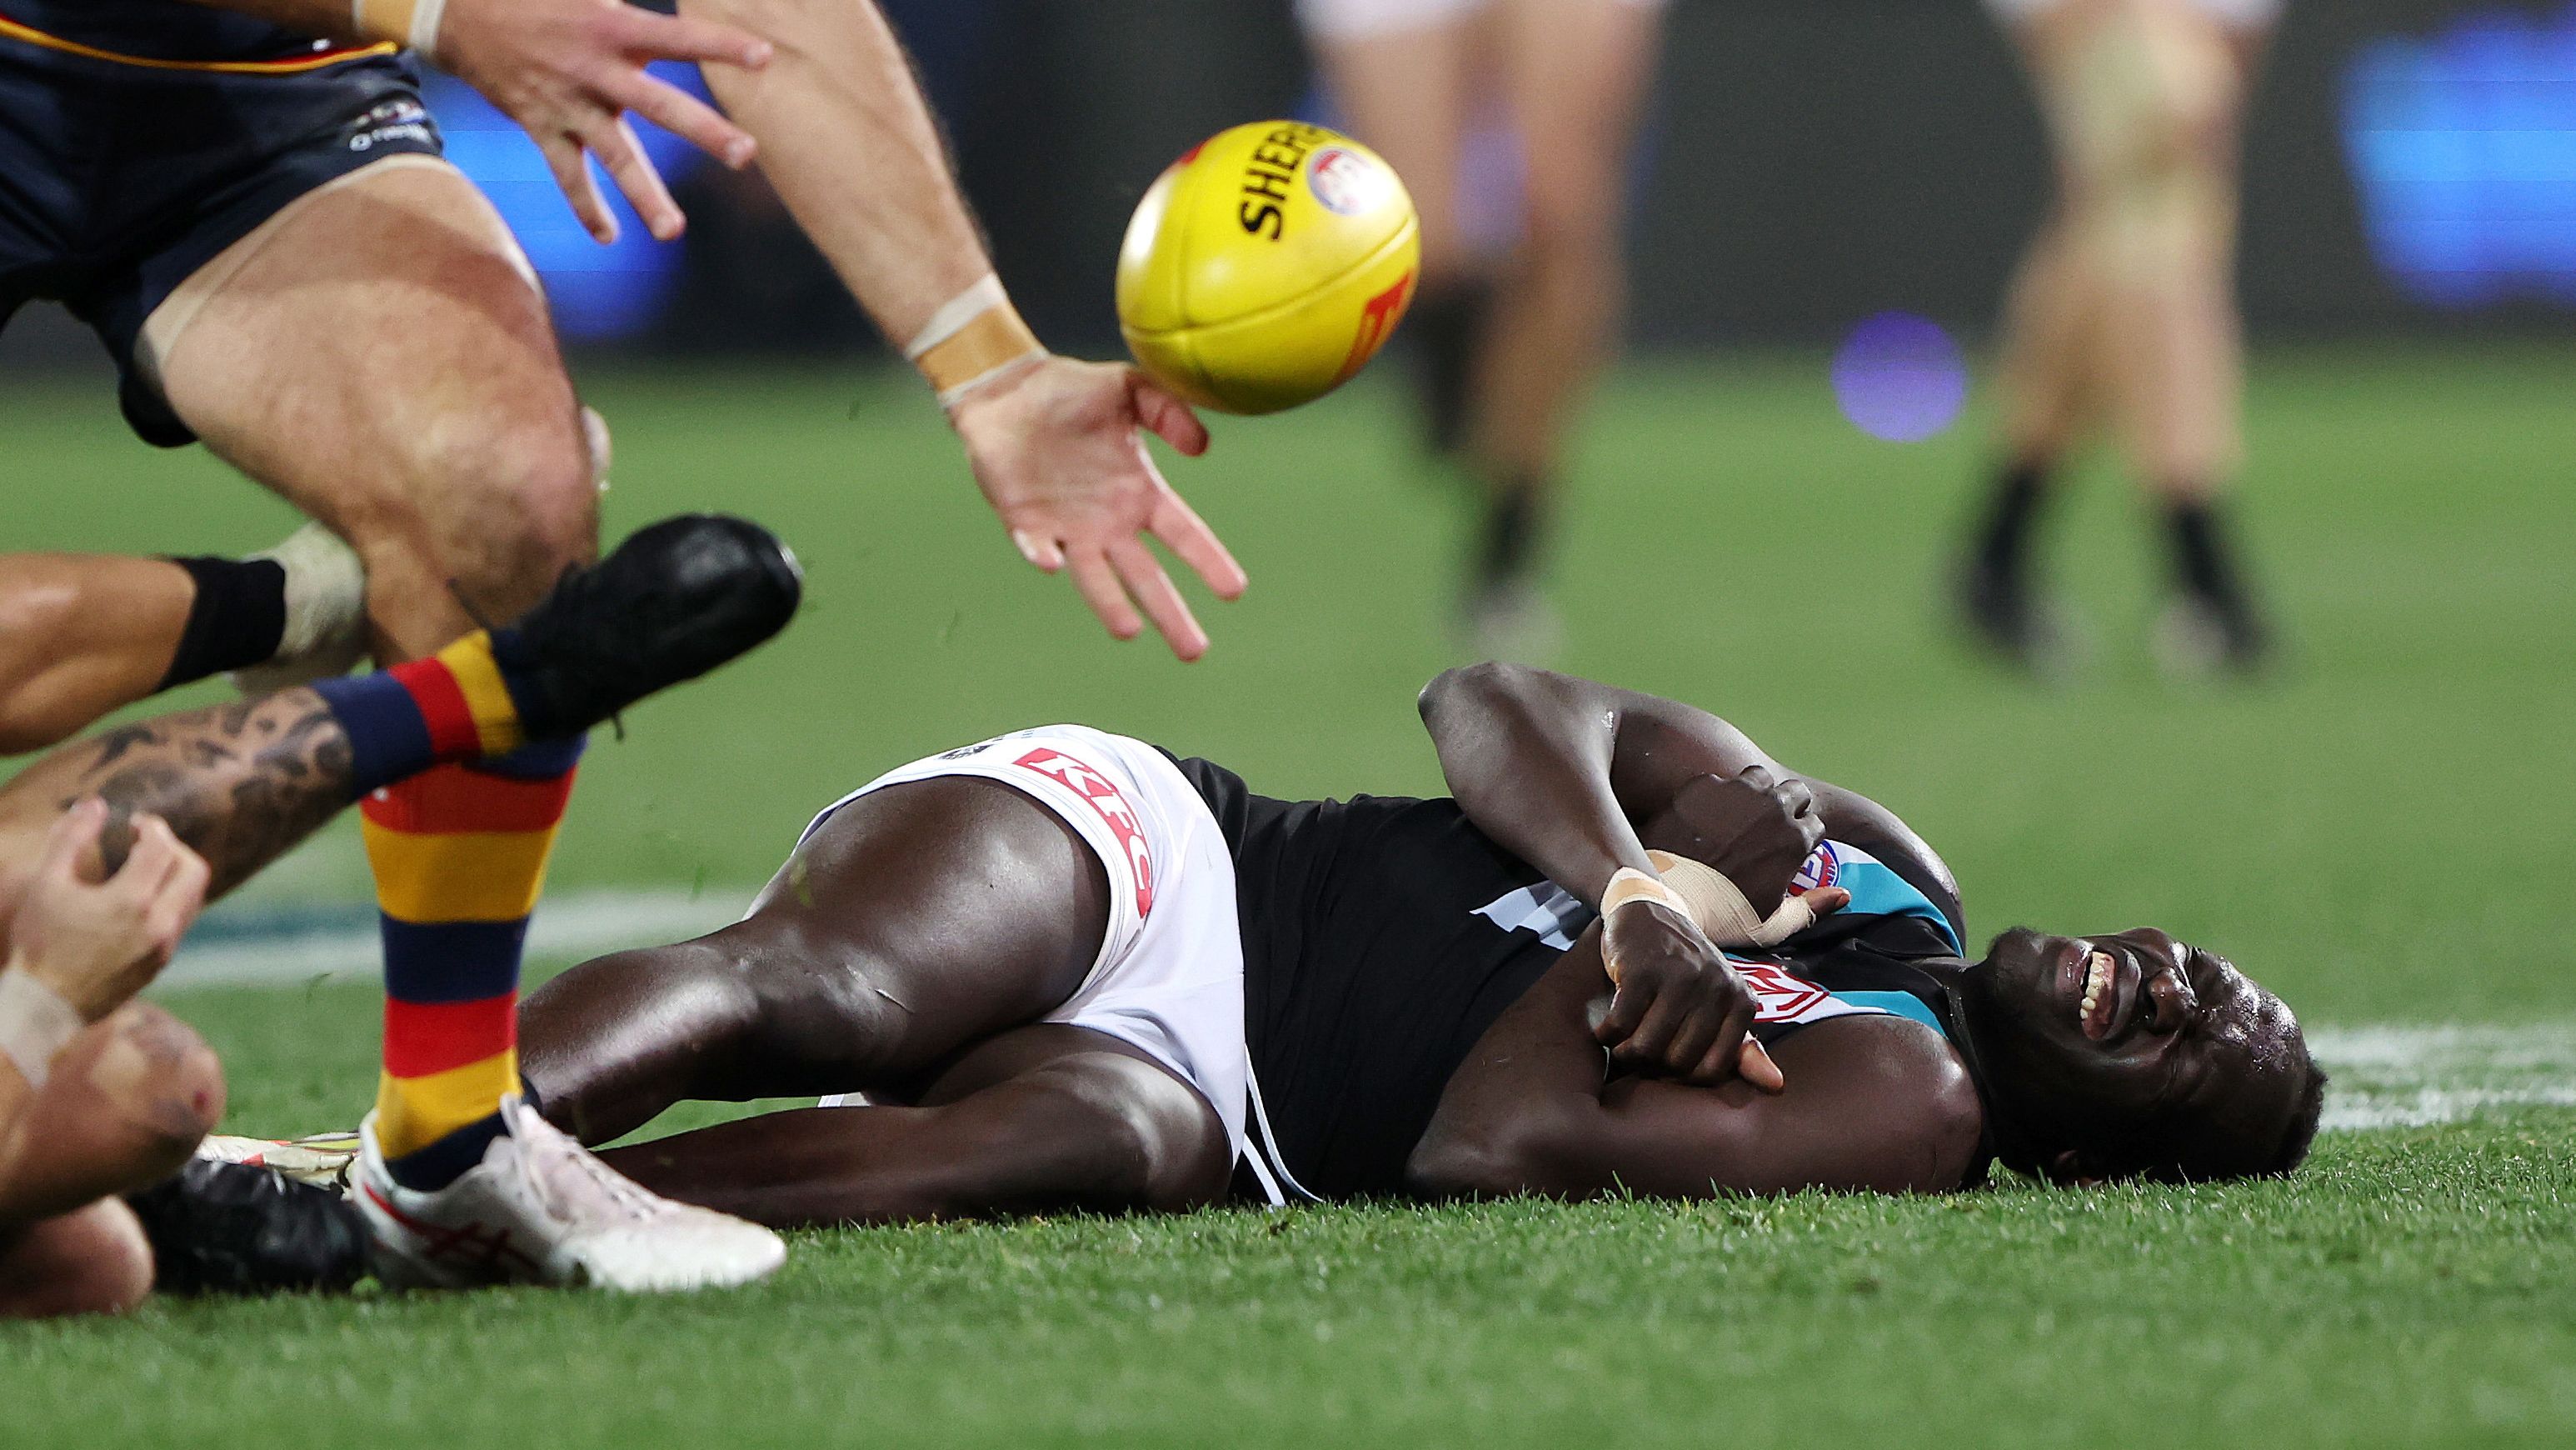 ADELAIDE, AUSTRALIA - JULY 29: Aliir Aliir of the Power down after a collision with Lachie Jones of the Power during the 2023 AFL Round 20 match between the Adelaide Crows and the Port Adelaide Power at Adelaide Oval on July 29, 2023 in Adelaide, Australia. (Photo by Sarah Reed/AFL Photos via Getty Images)